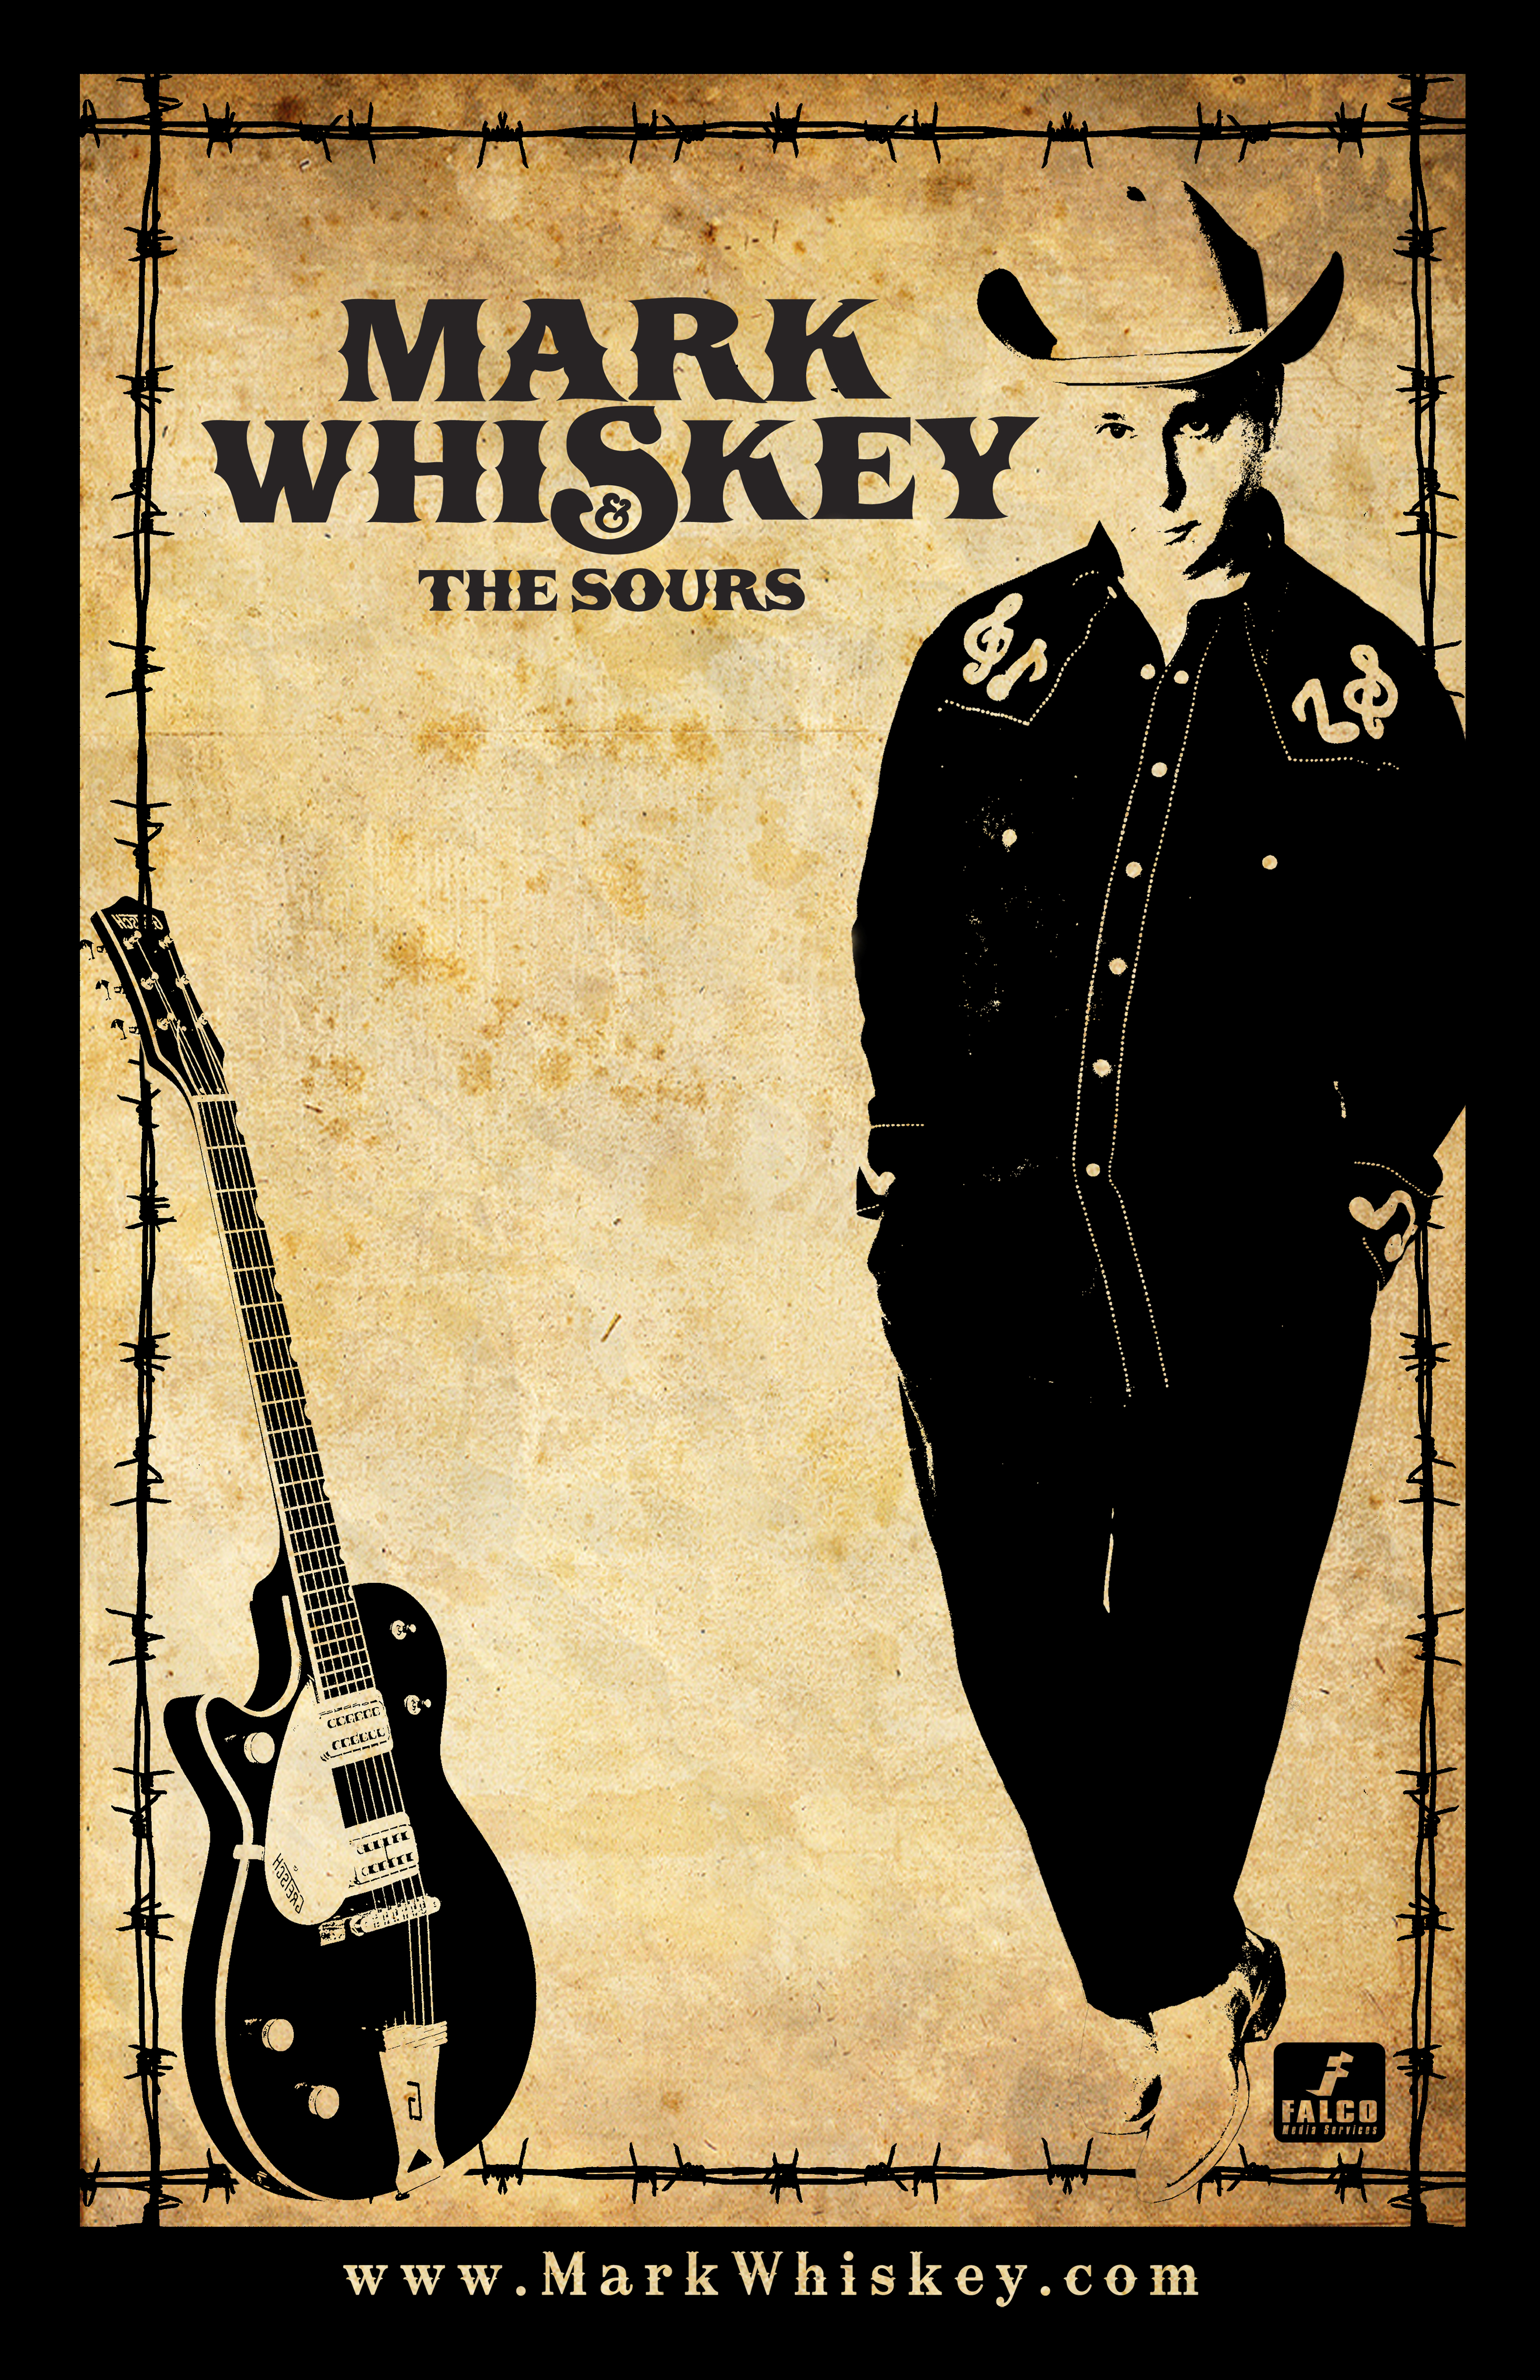 a vintage looking poster on a sepia background and with an image of the singer and his guitar in black